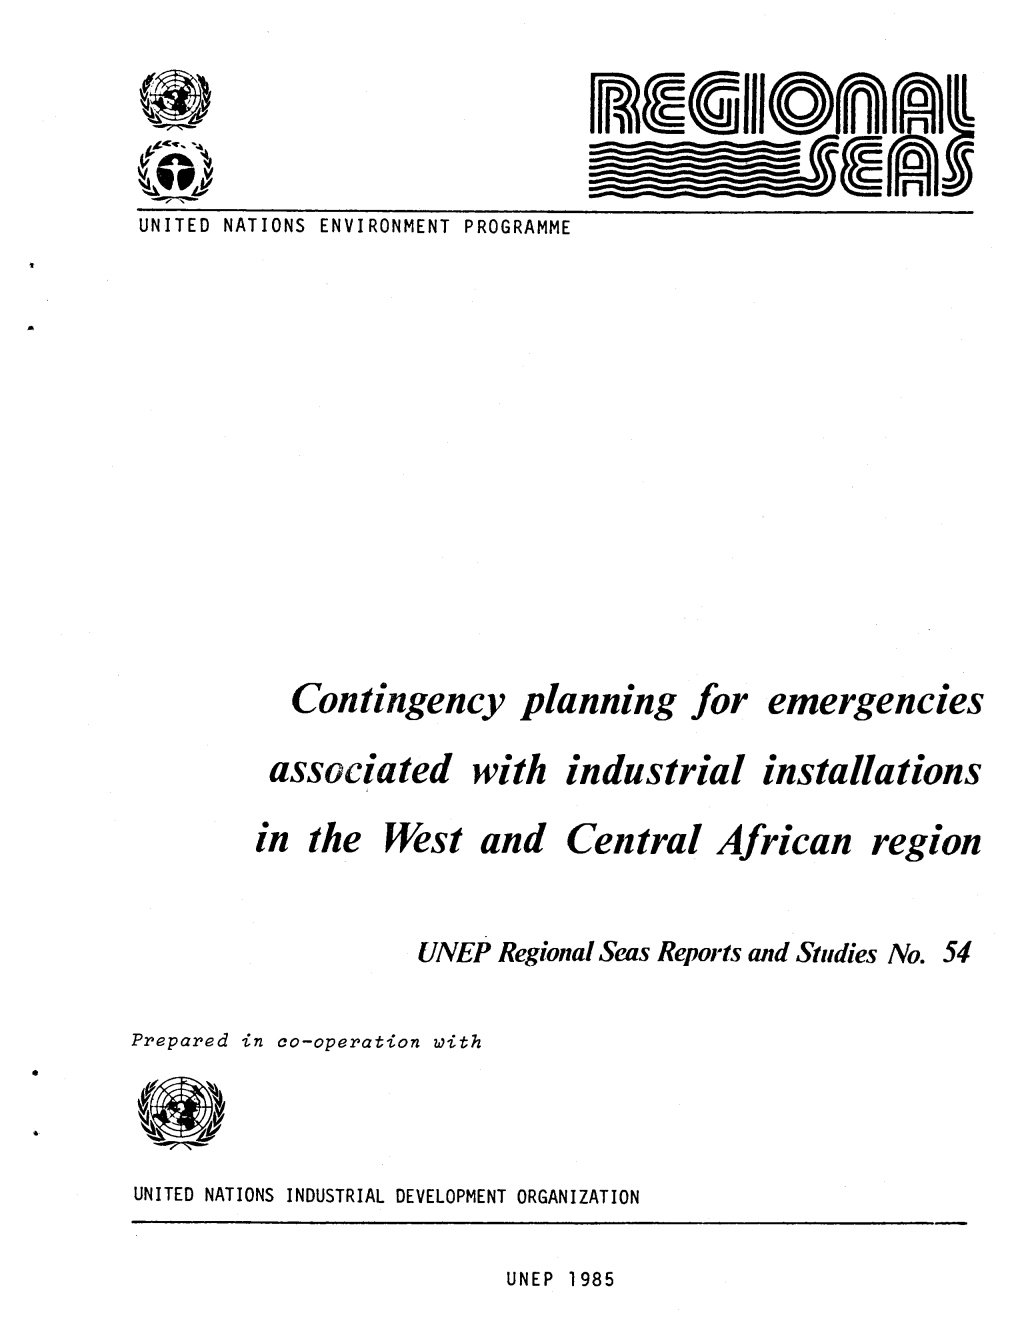 Contingency Planning for Emergencies Fed with Industrial Installations in the West and Central African Region